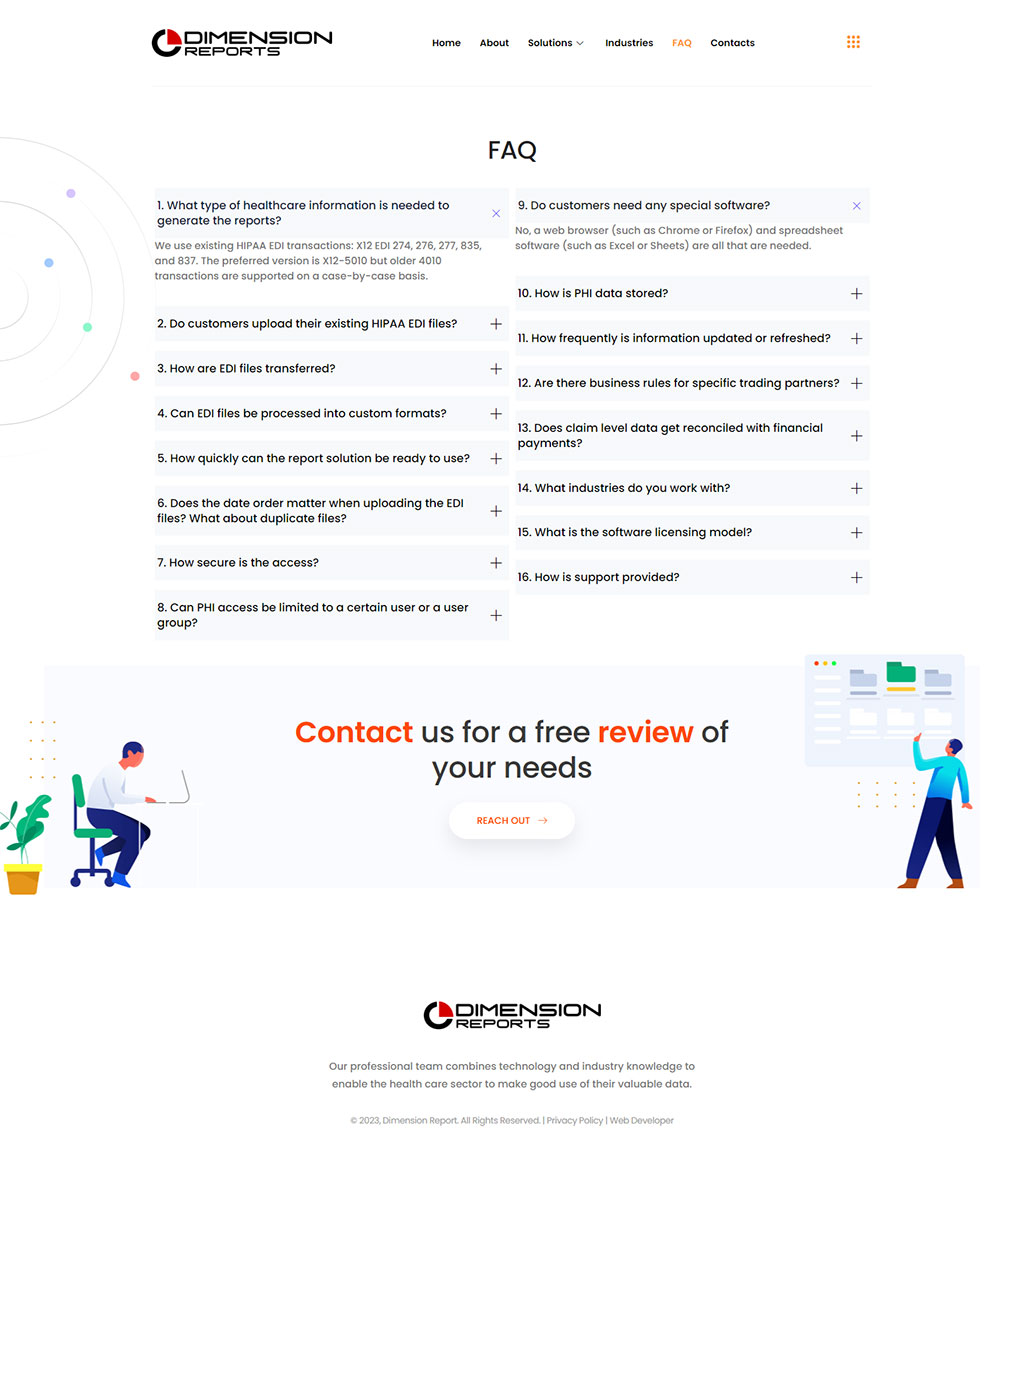 Website developed for Dimension Reports